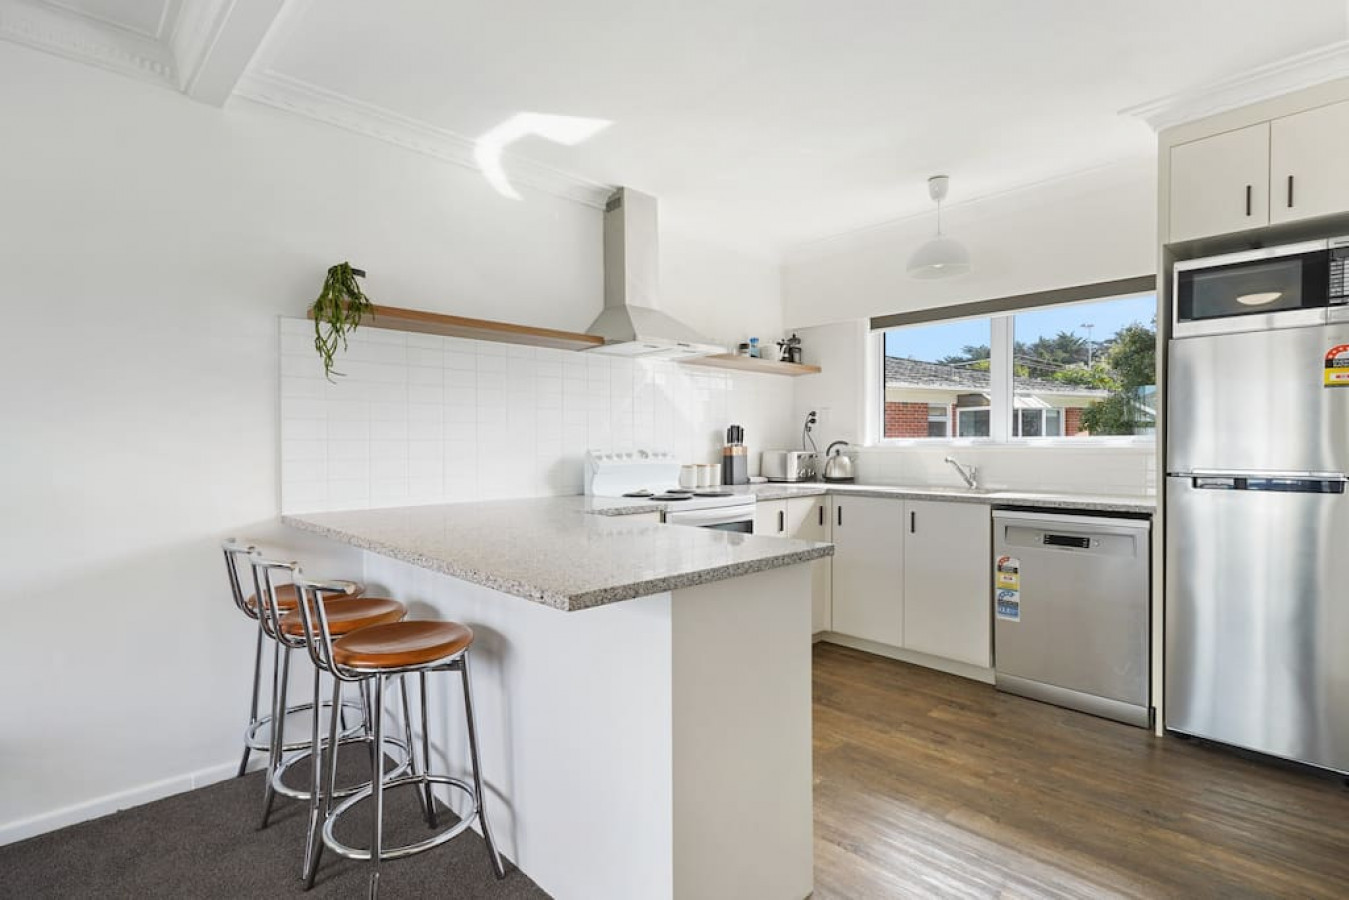 Property Image 2 - Renovated Two Bedroom Apartment with Free Parking and Walking Distance to Lake Pupuke